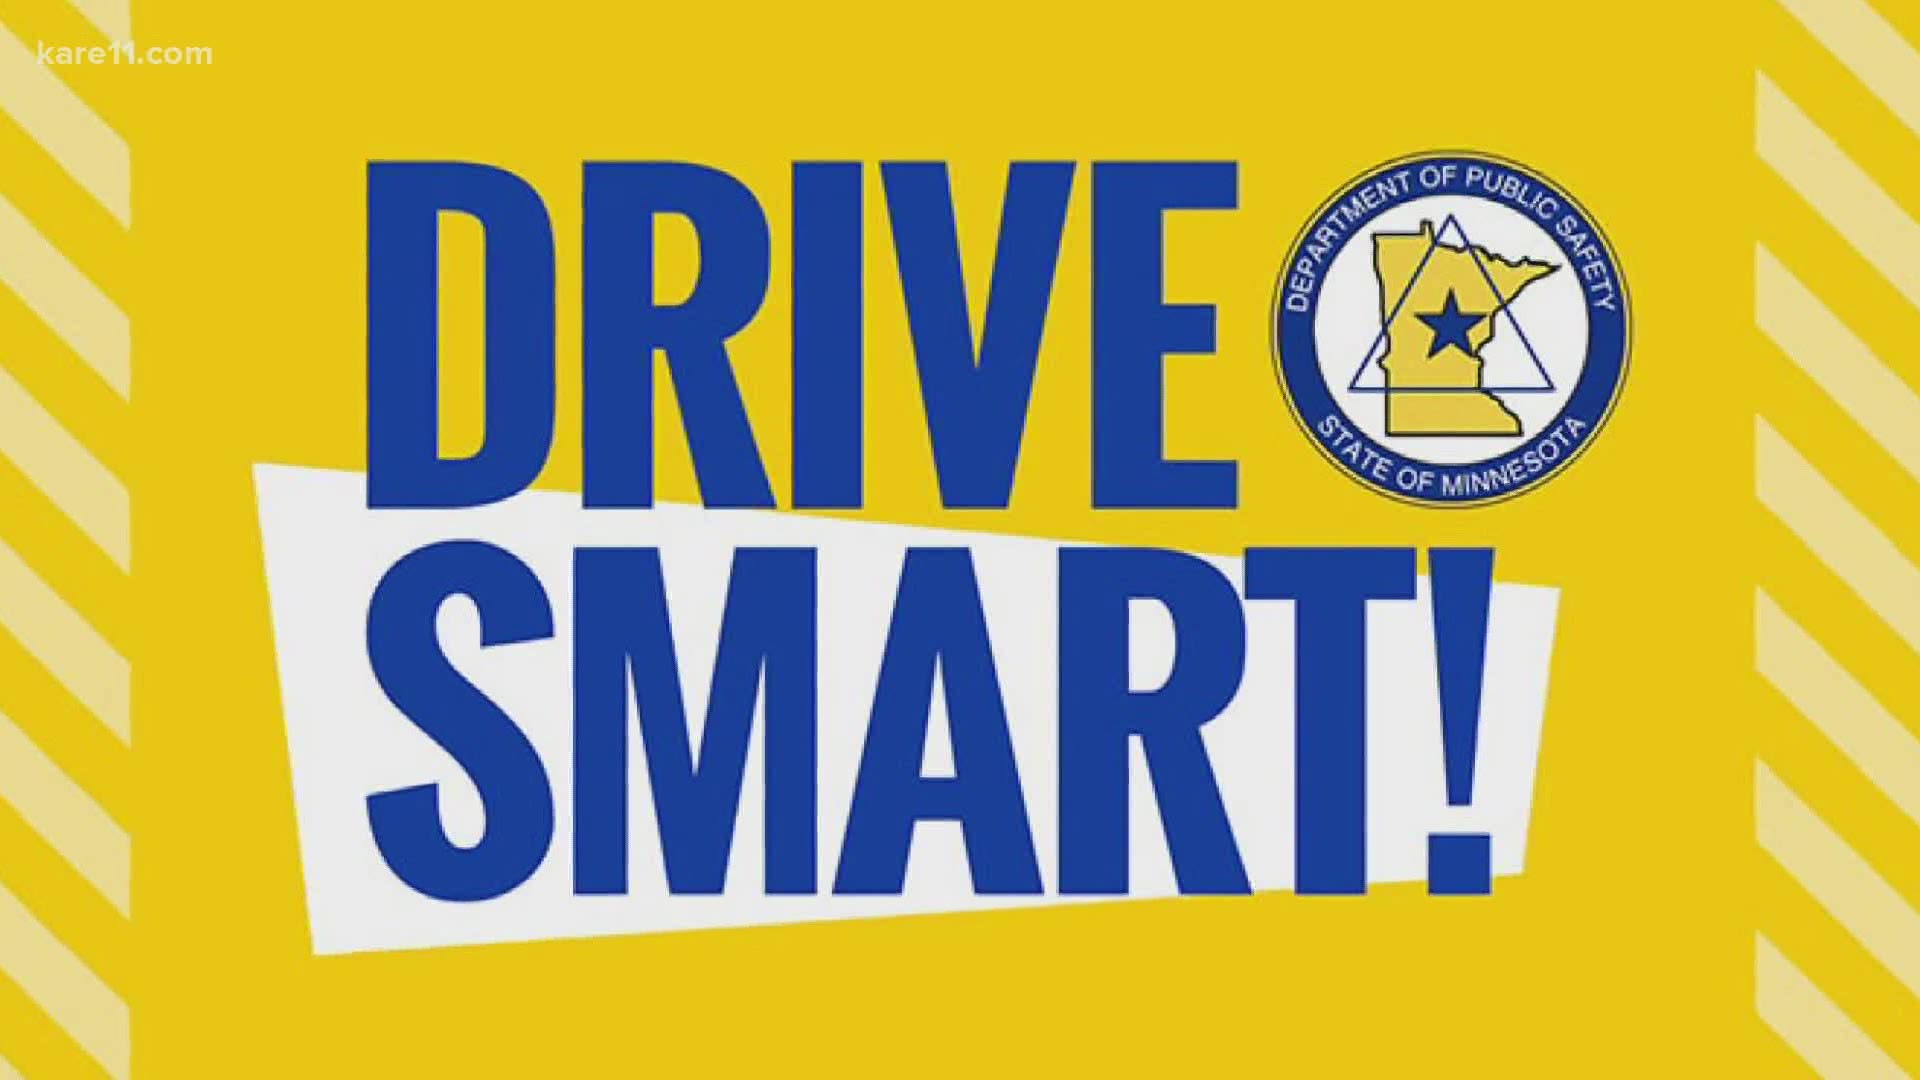 April is distracted driving awareness month, but due to the Coronavirus pandemic, the state's new awareness campaign was put on hold until now.